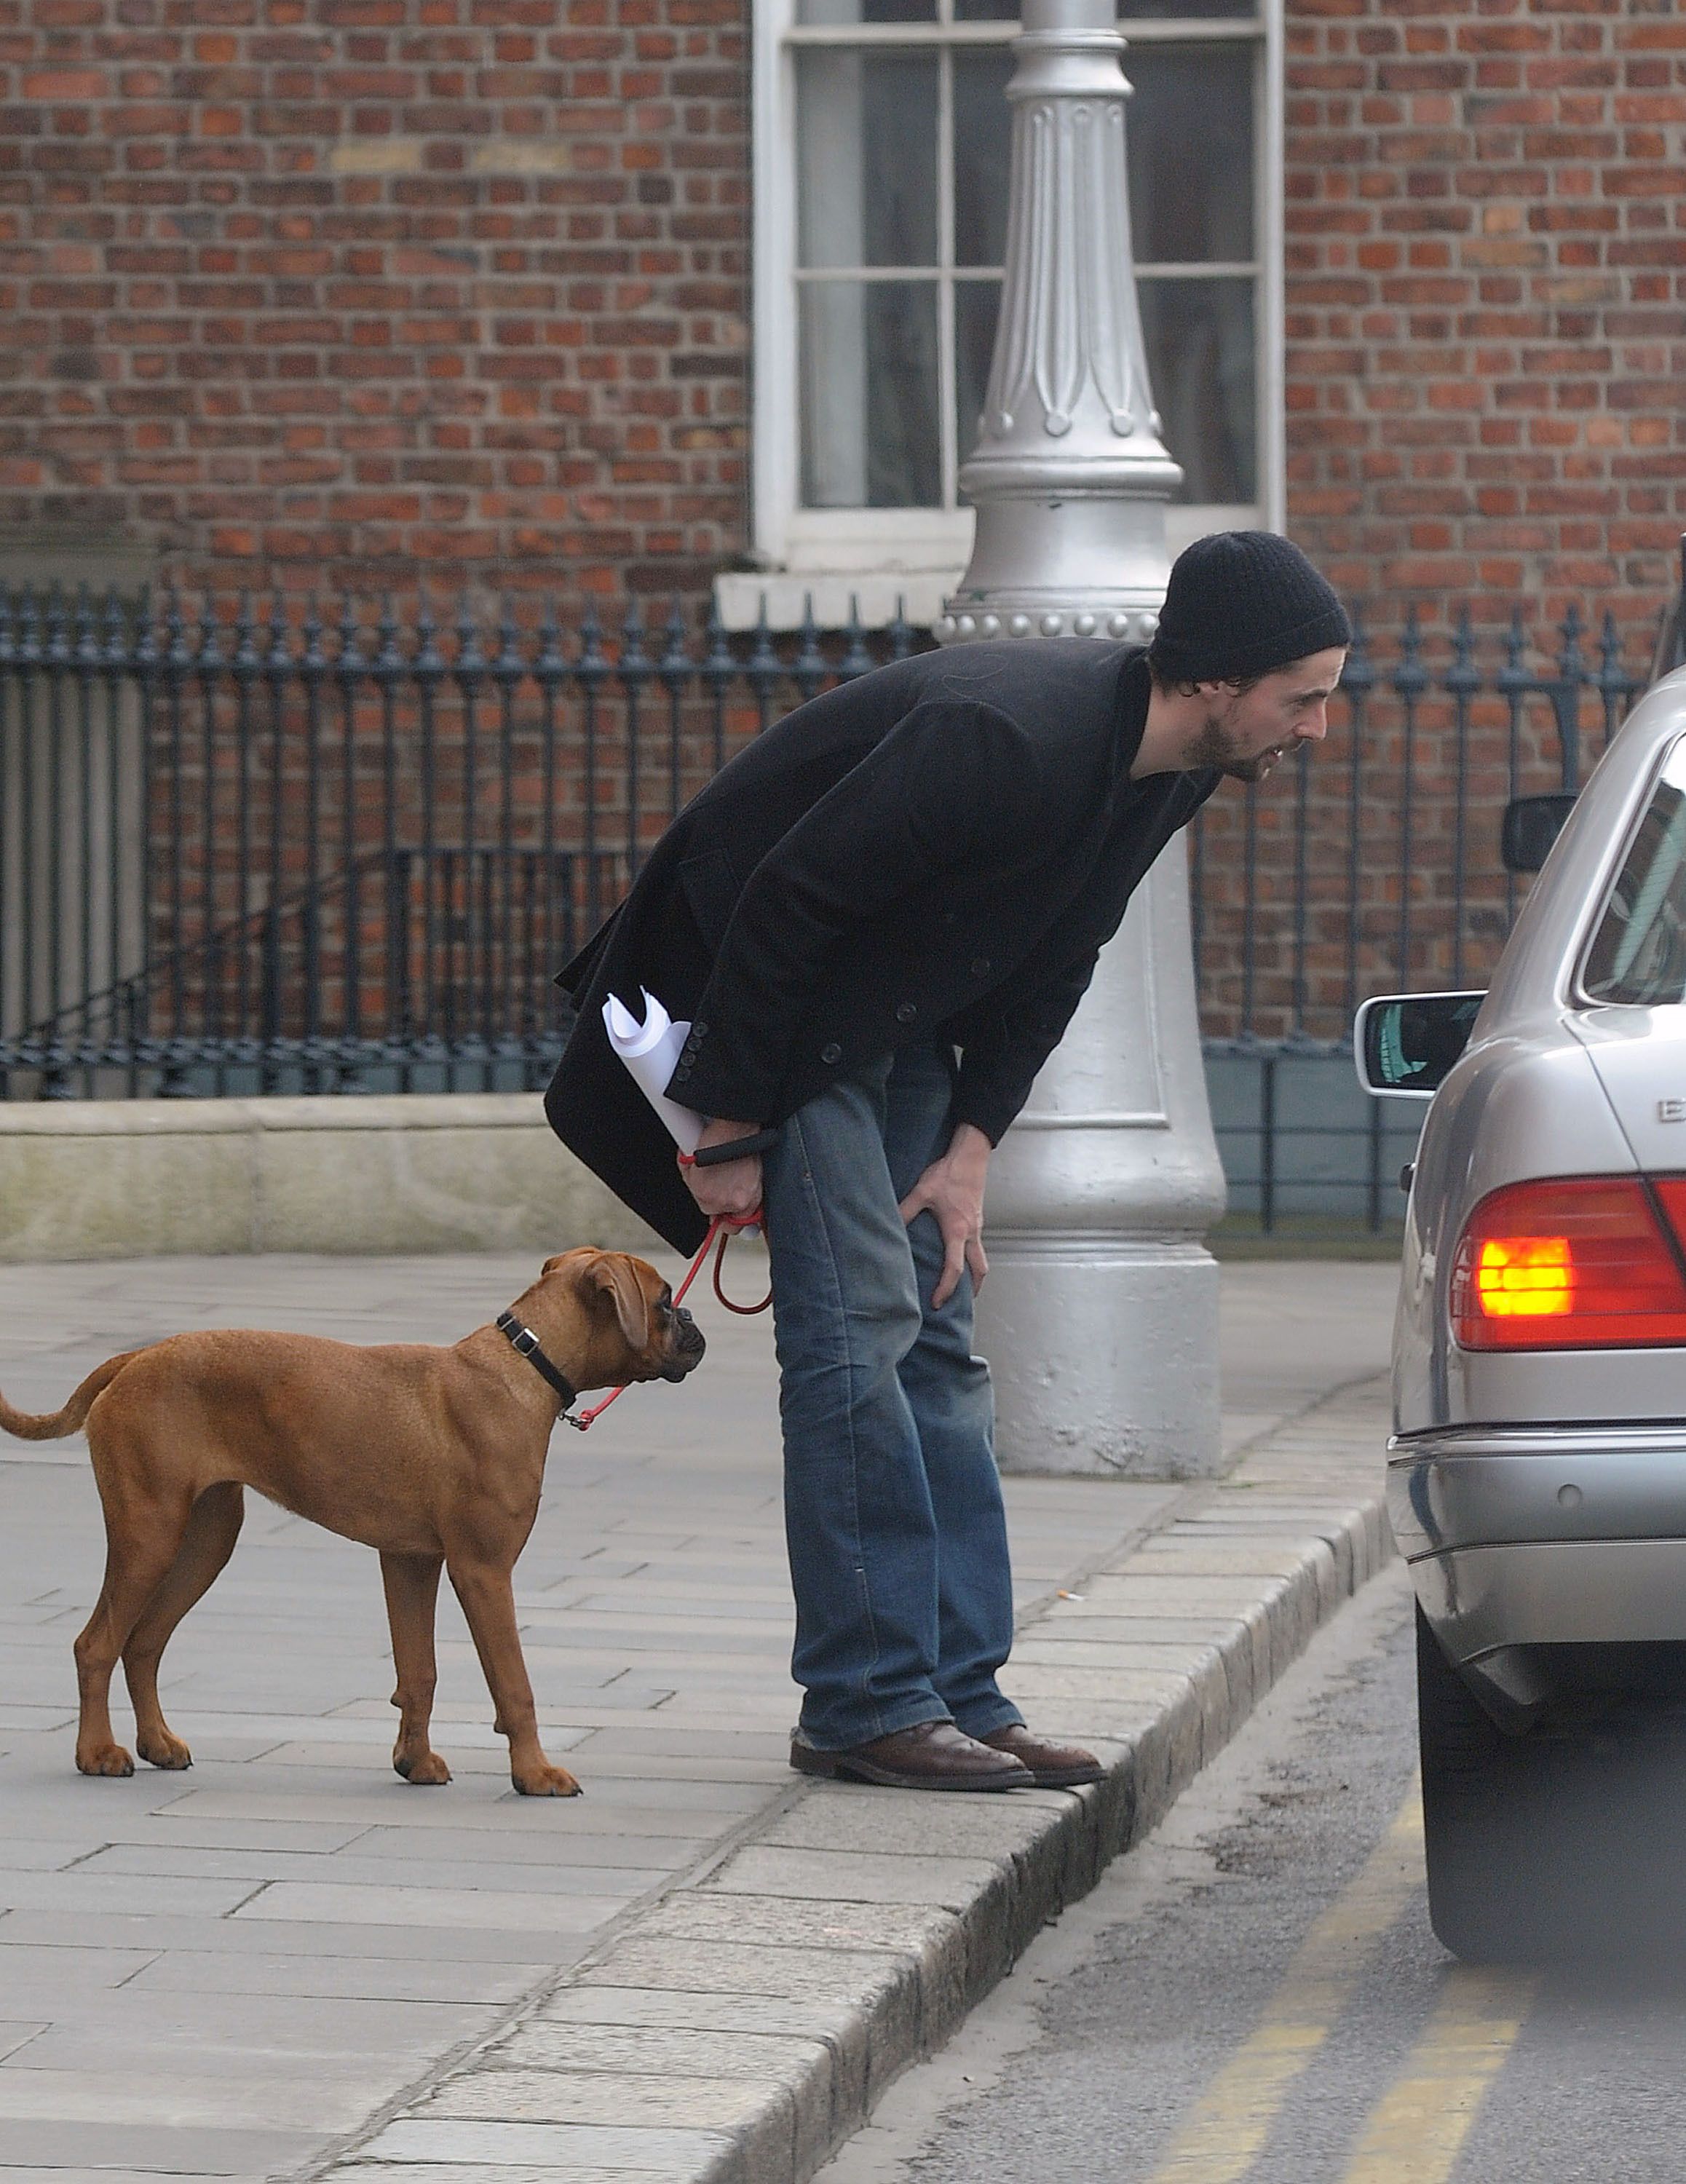 Matthew Goode bowing while talking to the person inside the car with his Boxer dog standing behind him